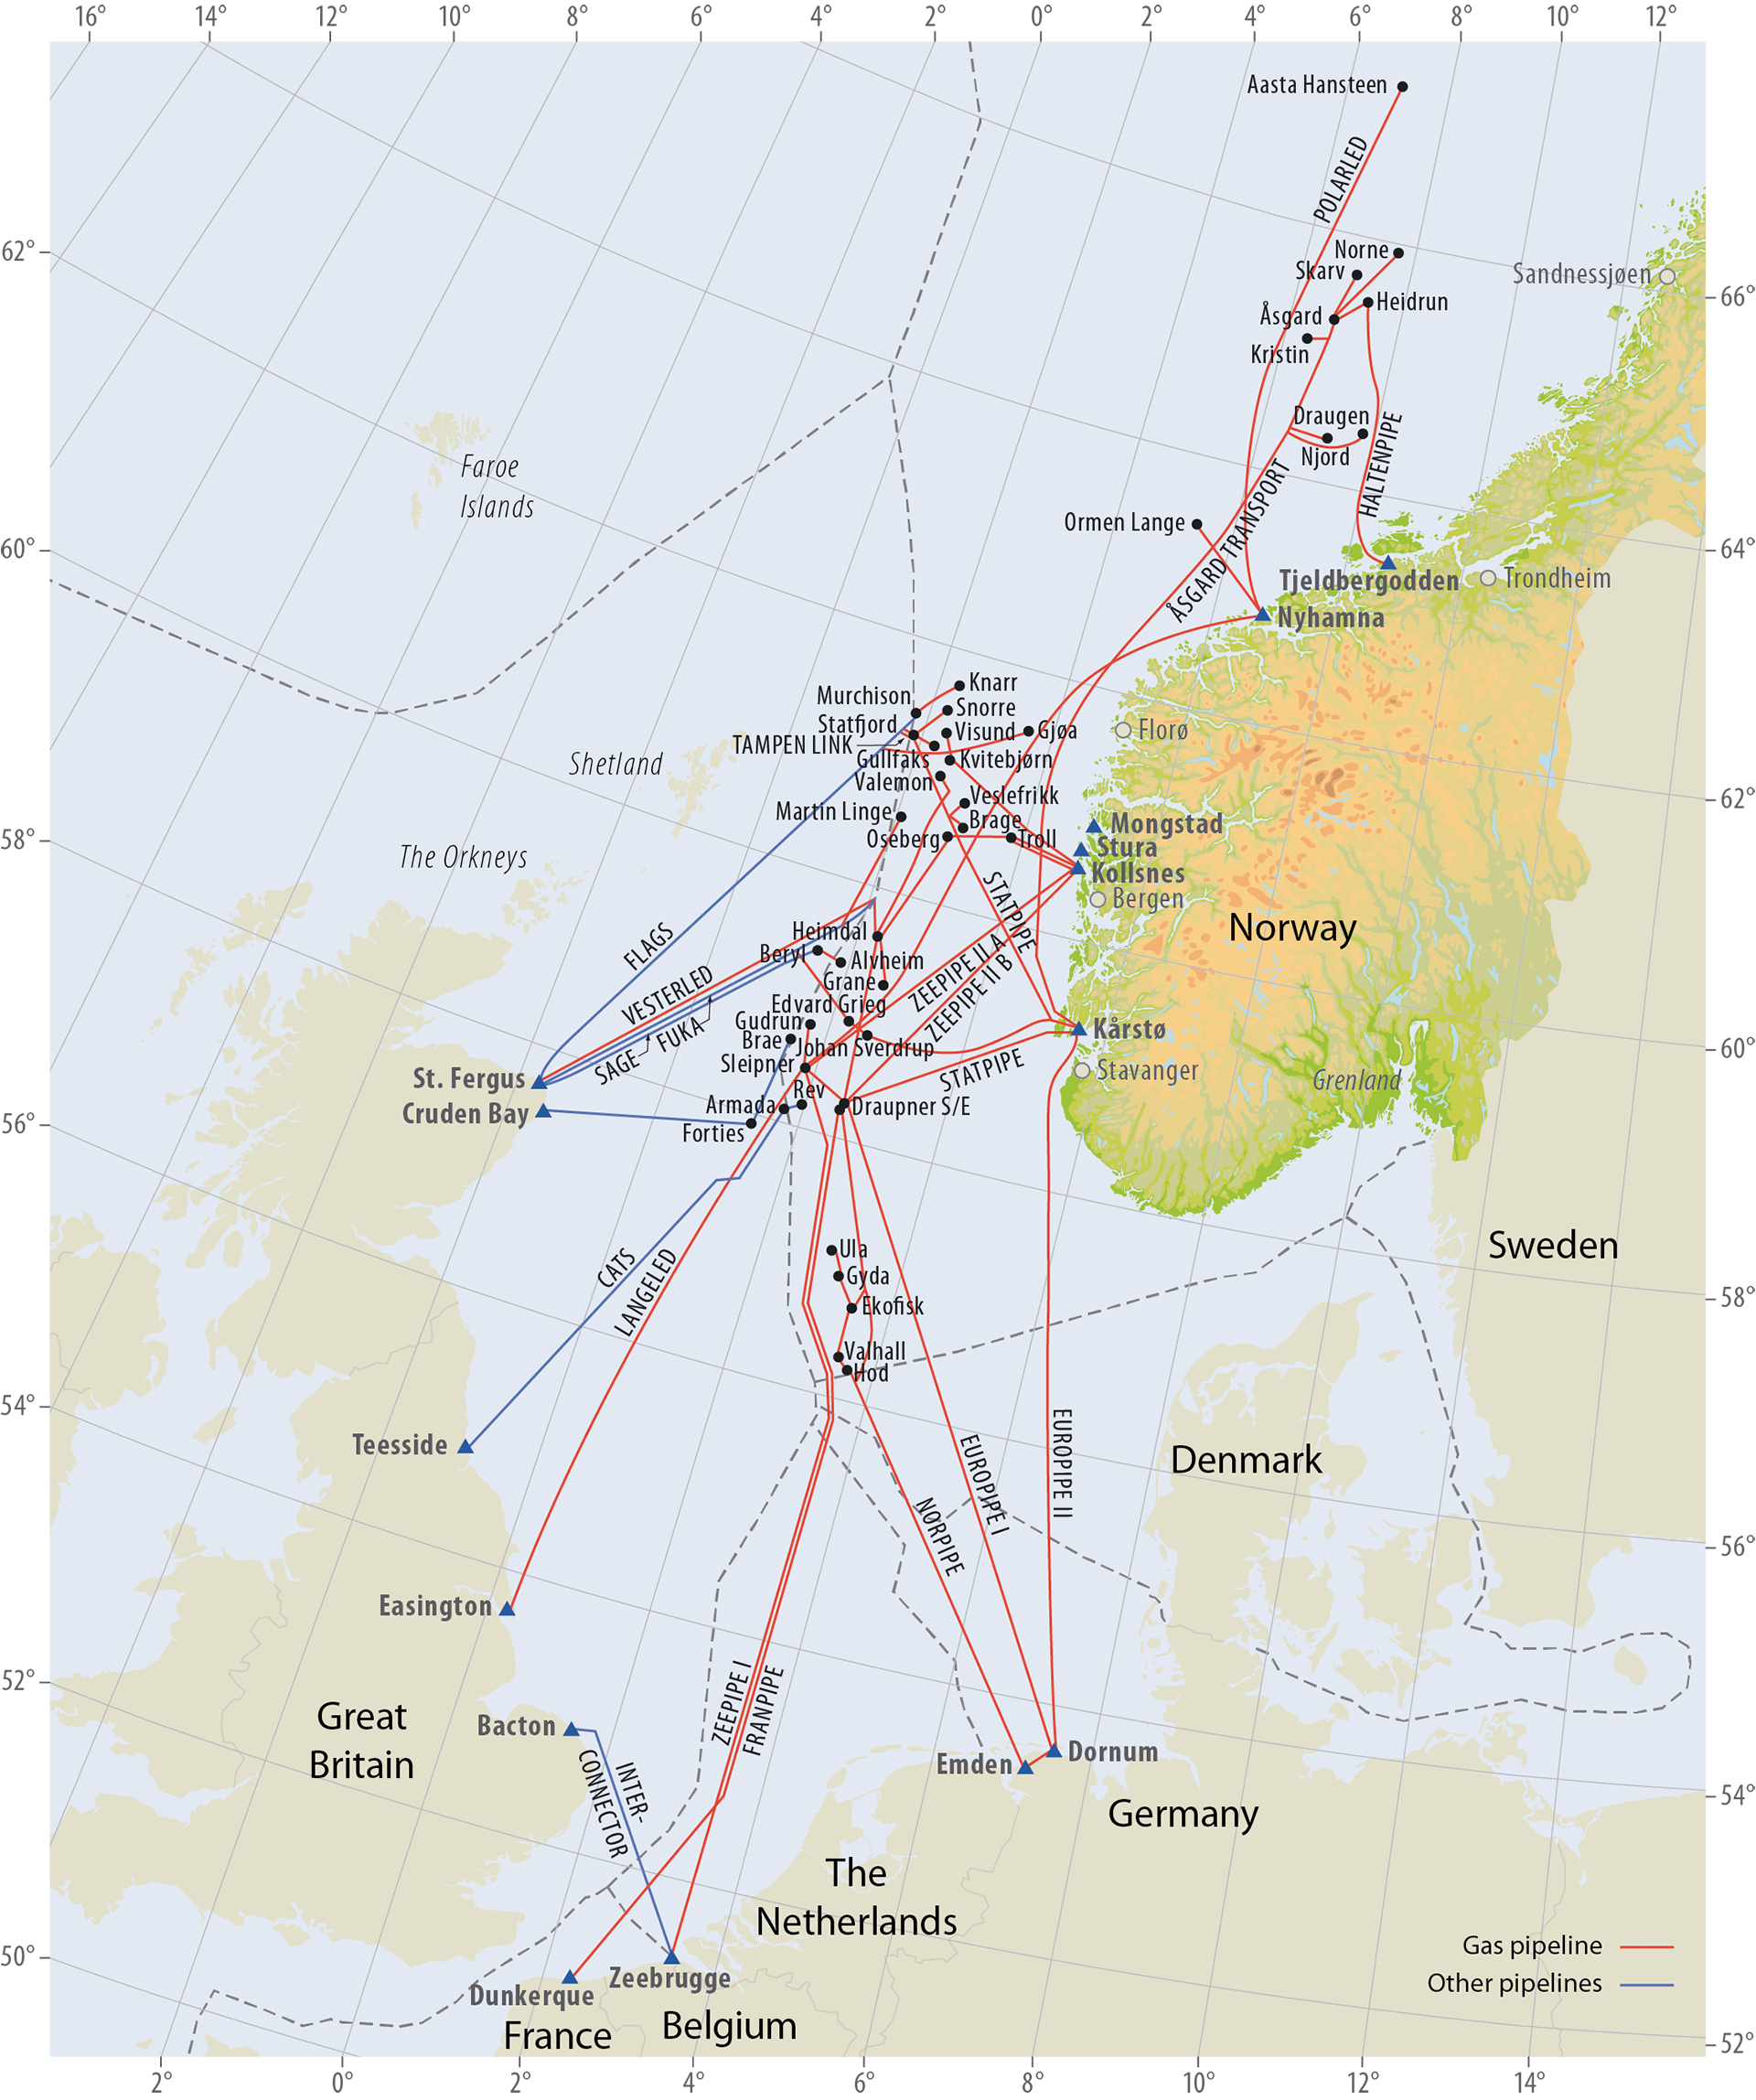 Gas pipelines on the Norwegian continental shelf